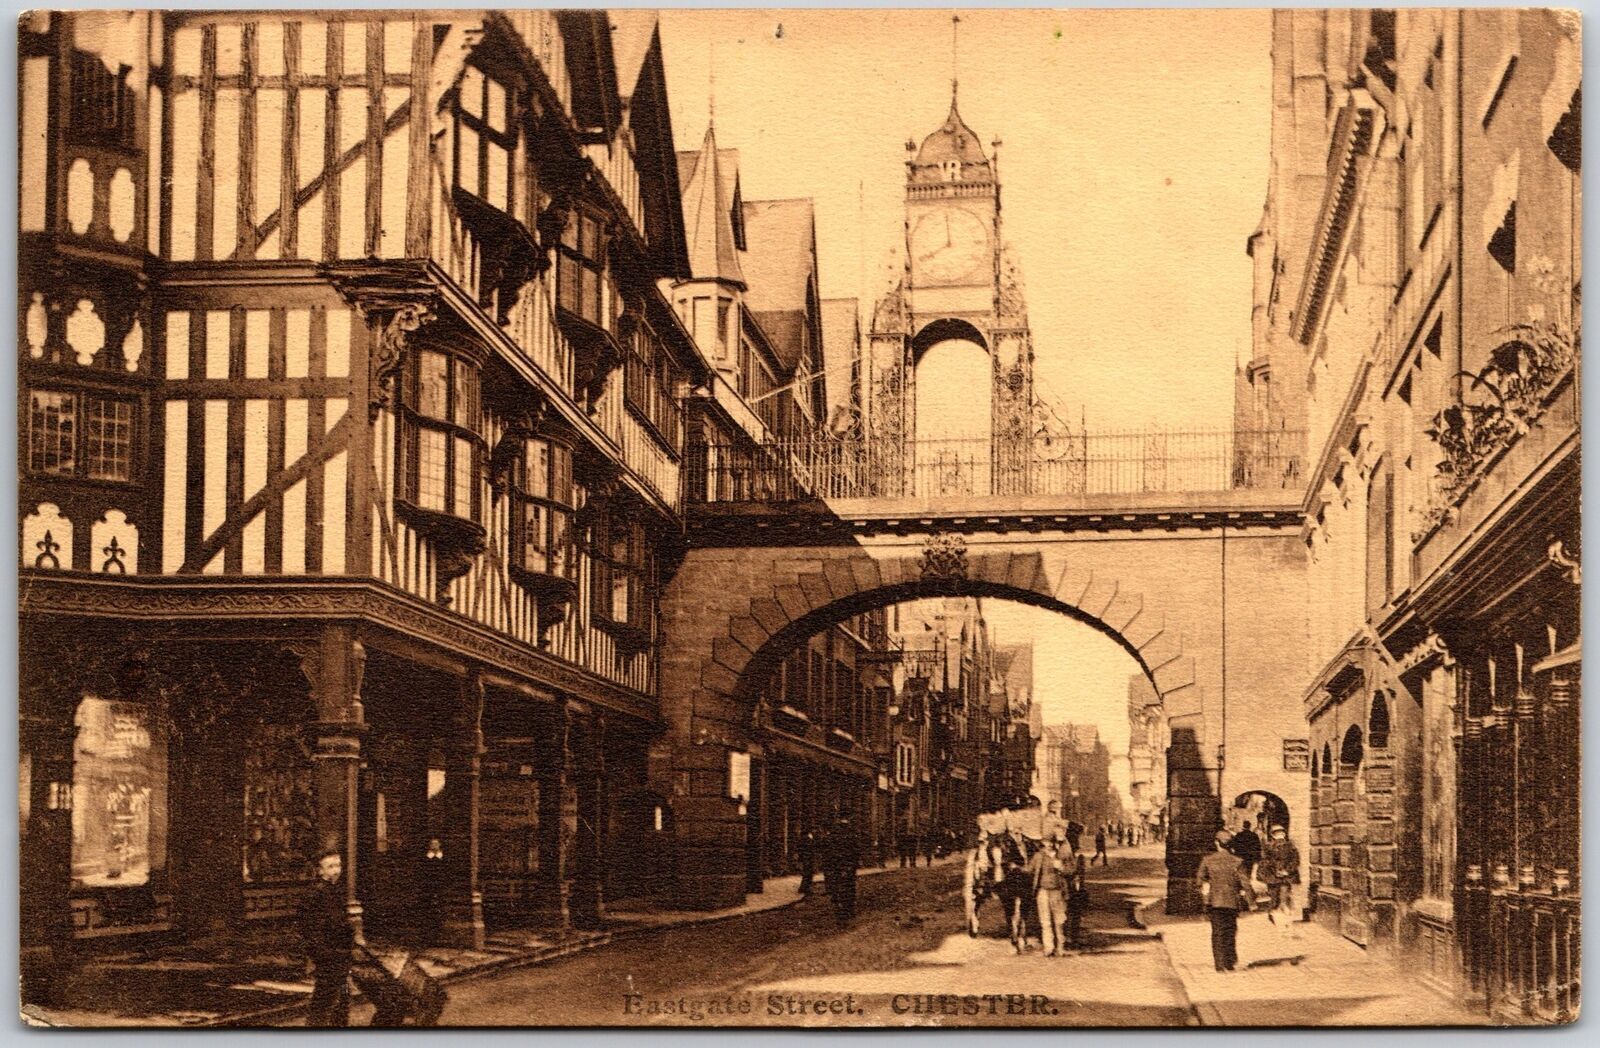 1910 Eastgate Street Chester England Historical Building Antique Posted Postcard